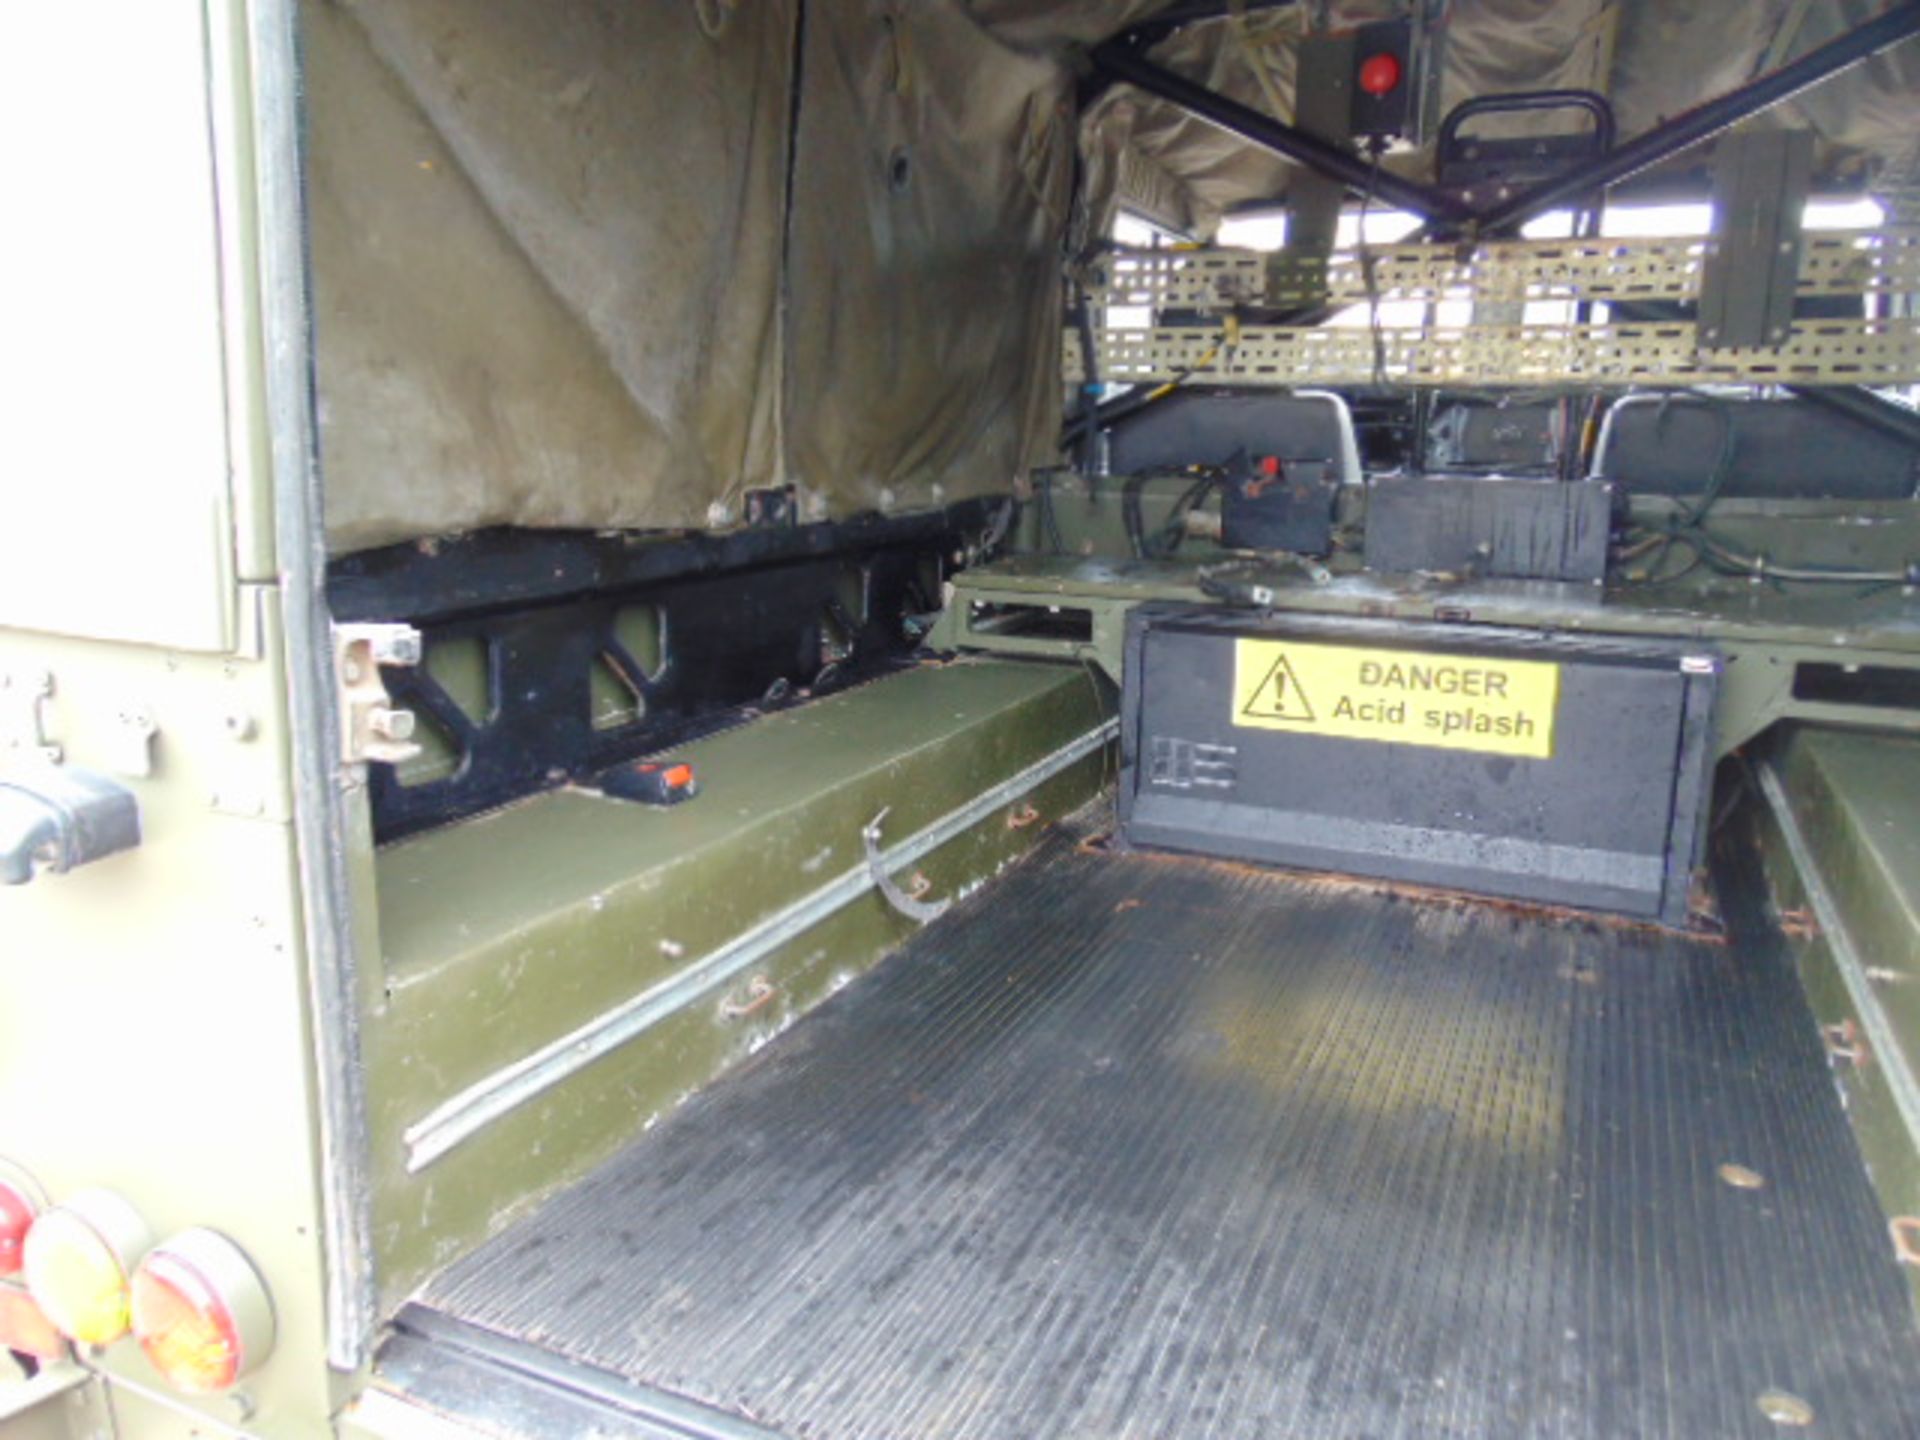 Military Specification Land Rover Wolf 110 Hard Top - Image 14 of 25